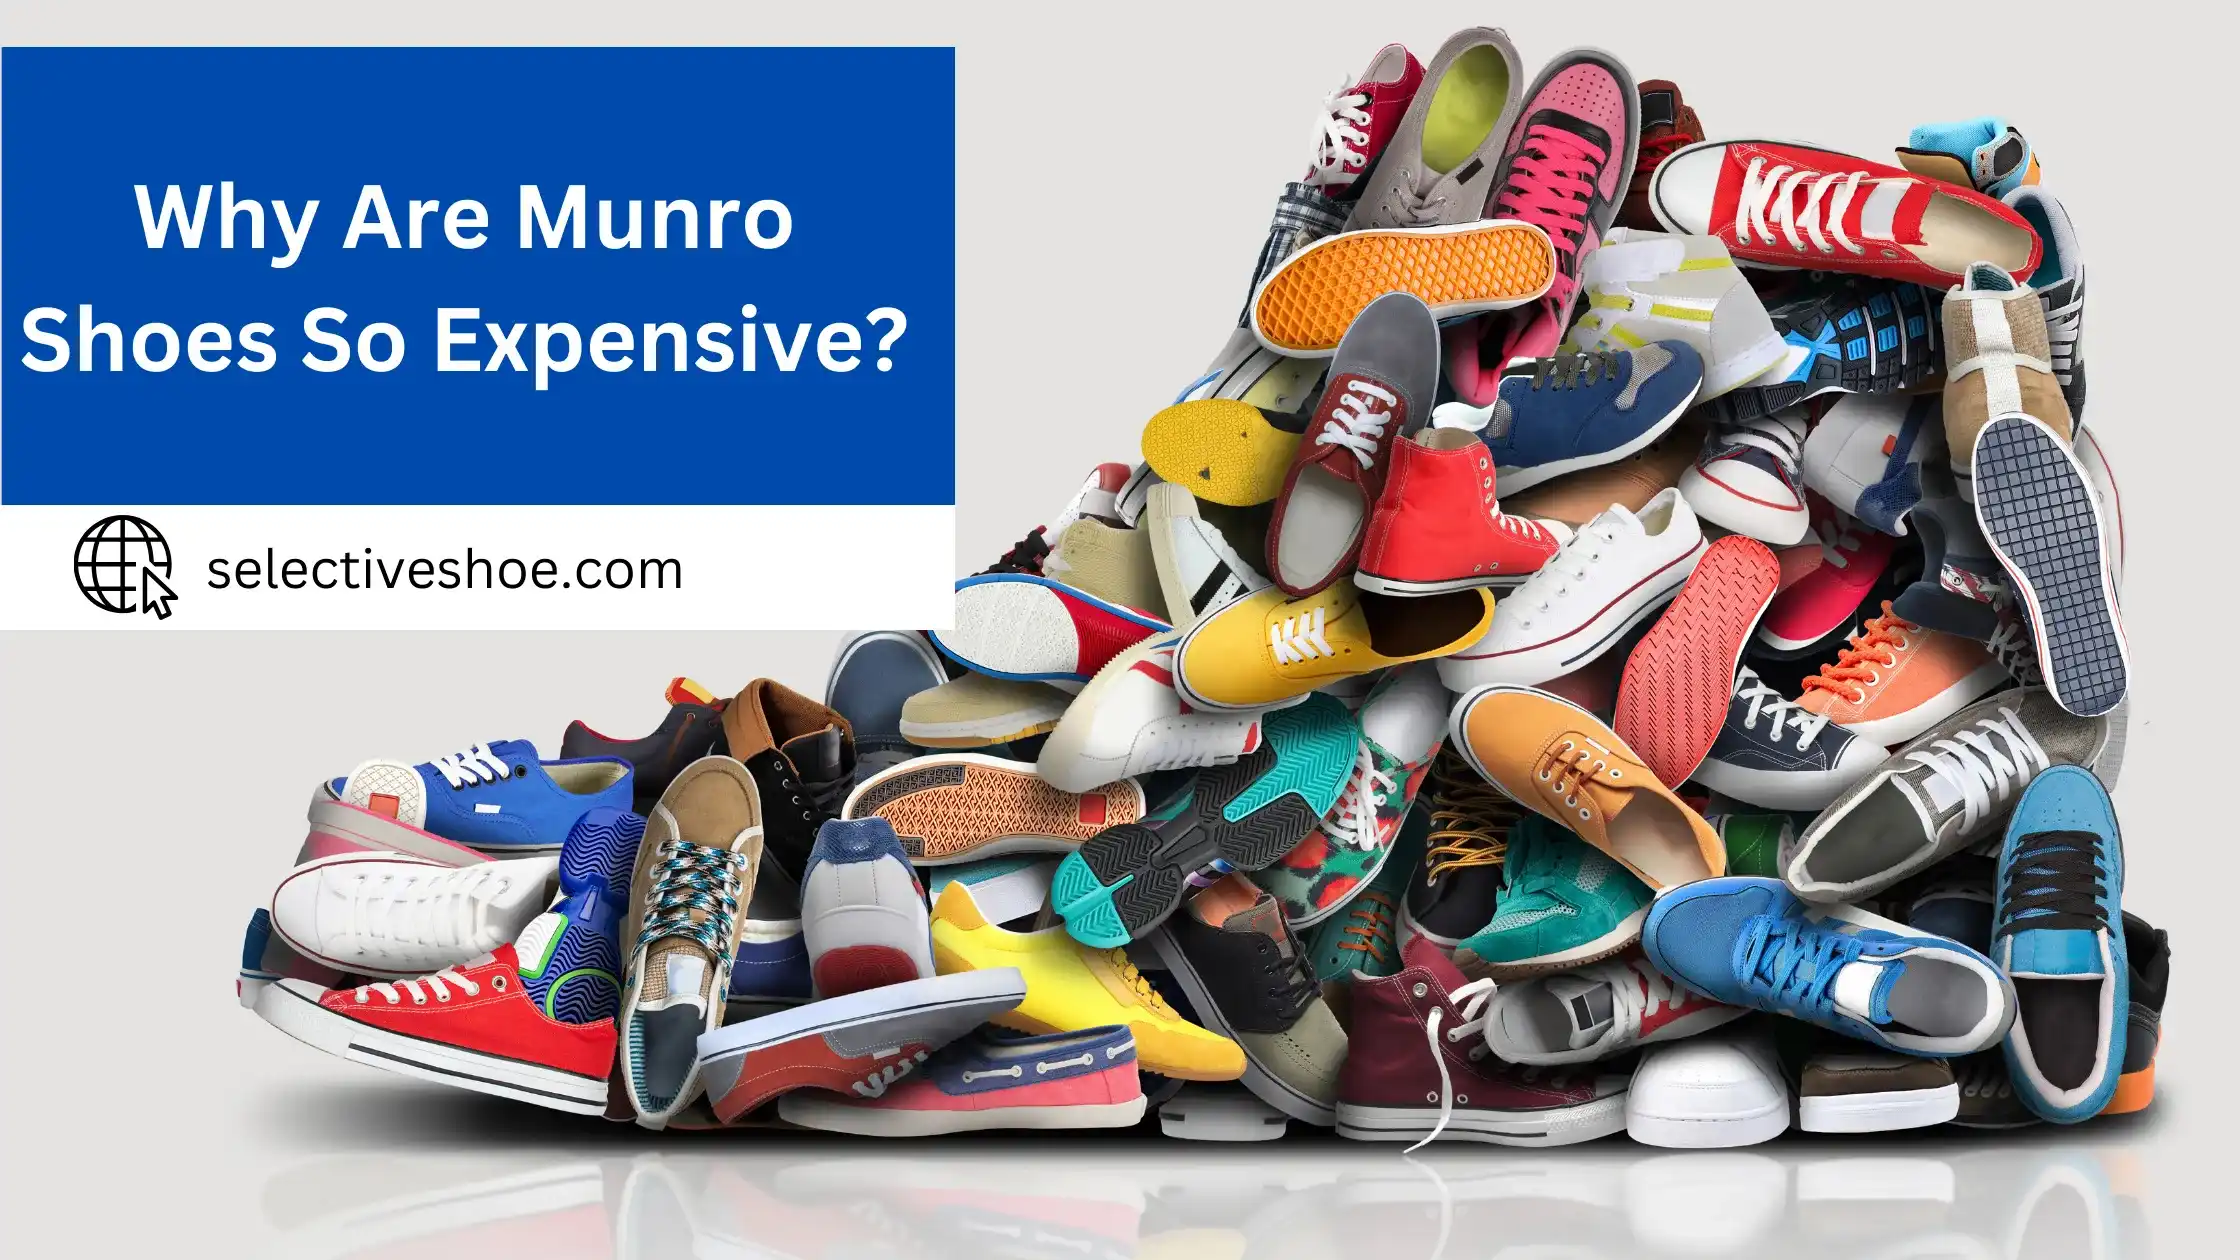 Why Are Munro Shoes So Expensive? Detailed Information